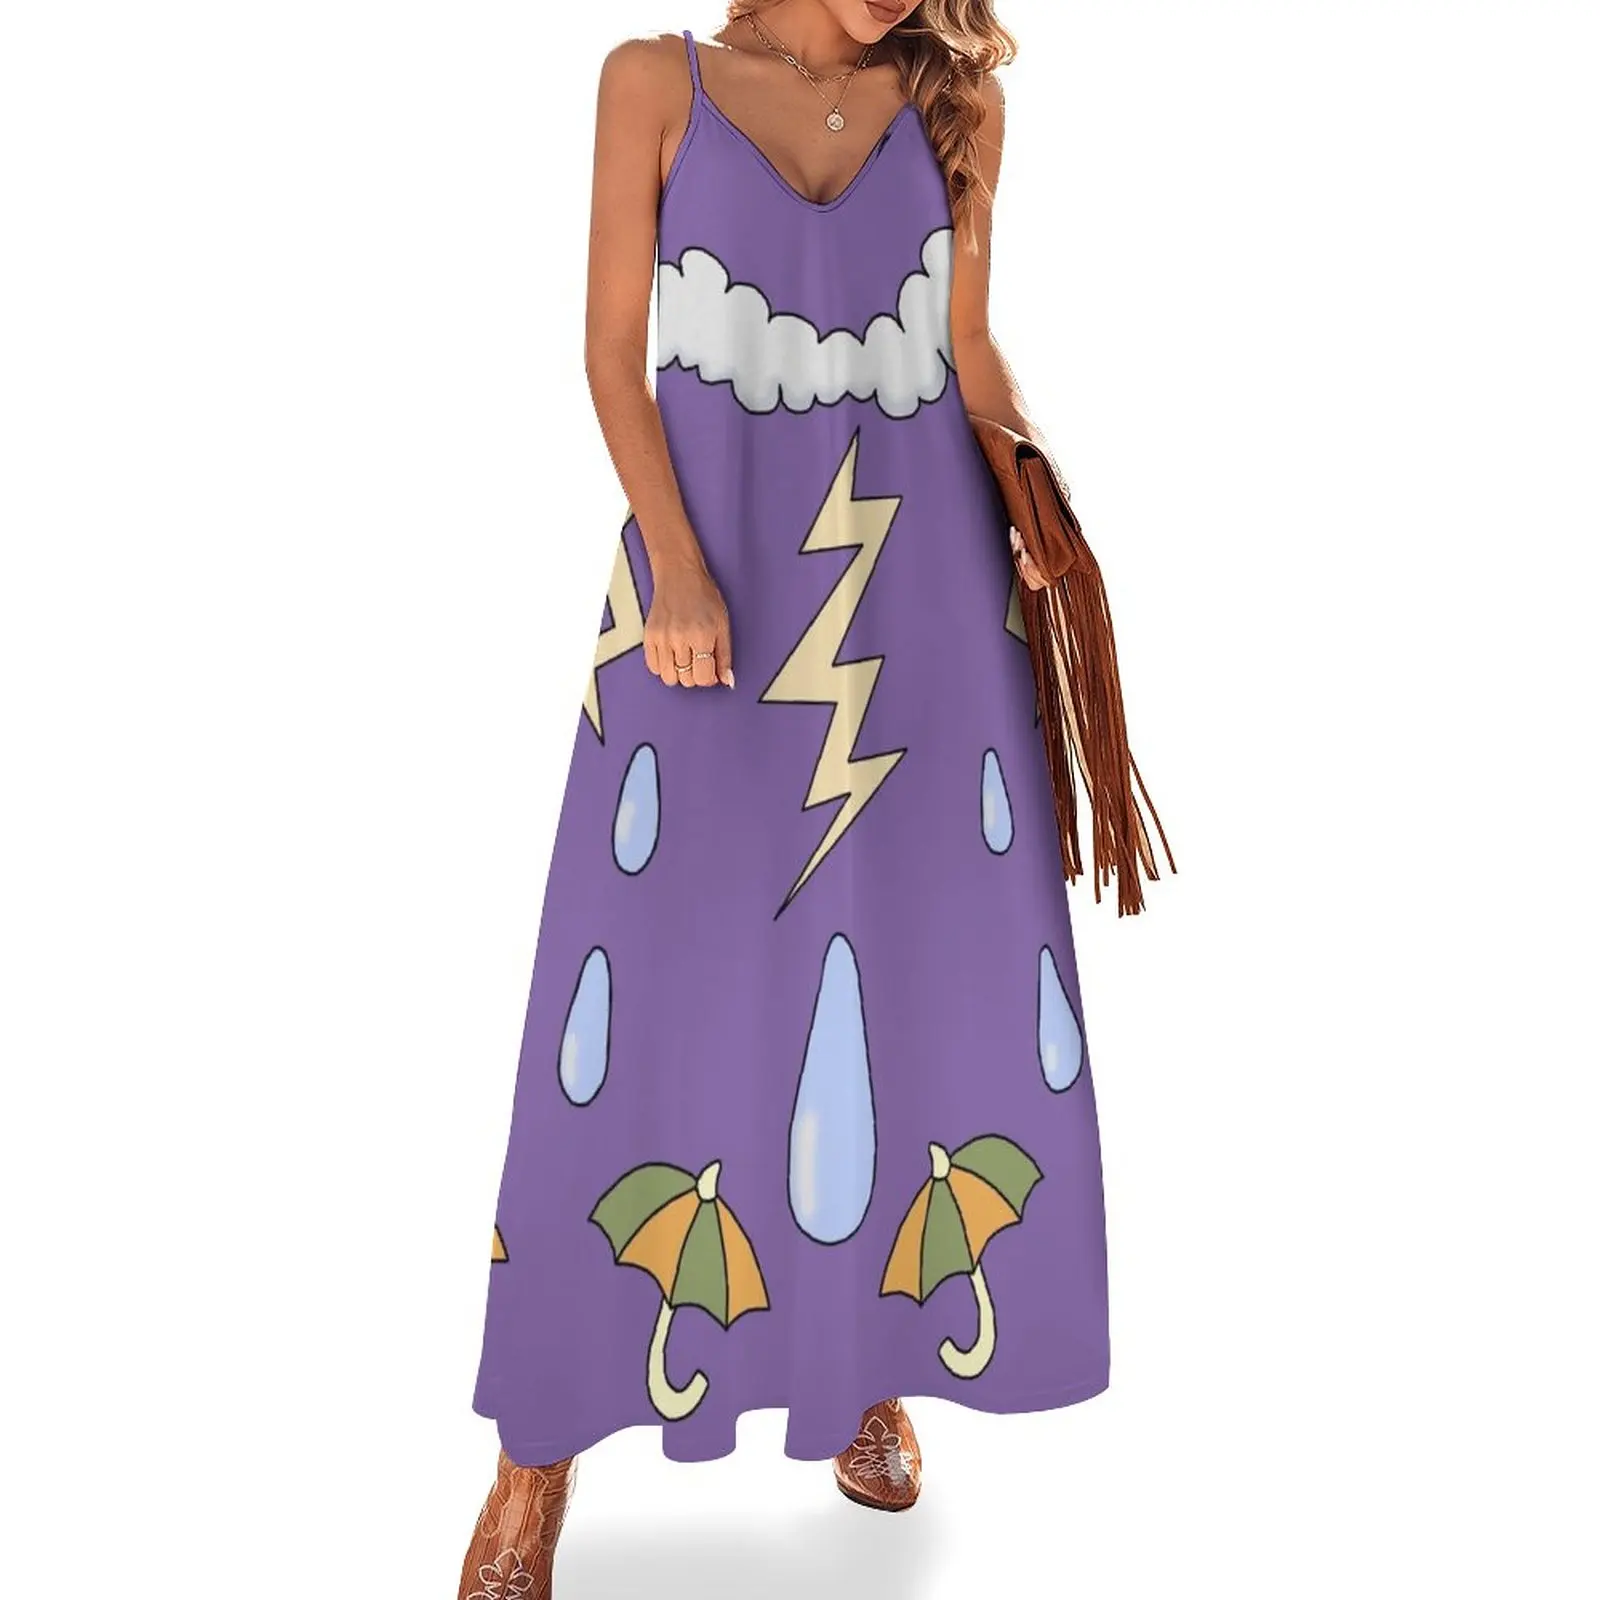 

Miss Frizzle Weather Sleeveless Dress Clothing Party dresses for women